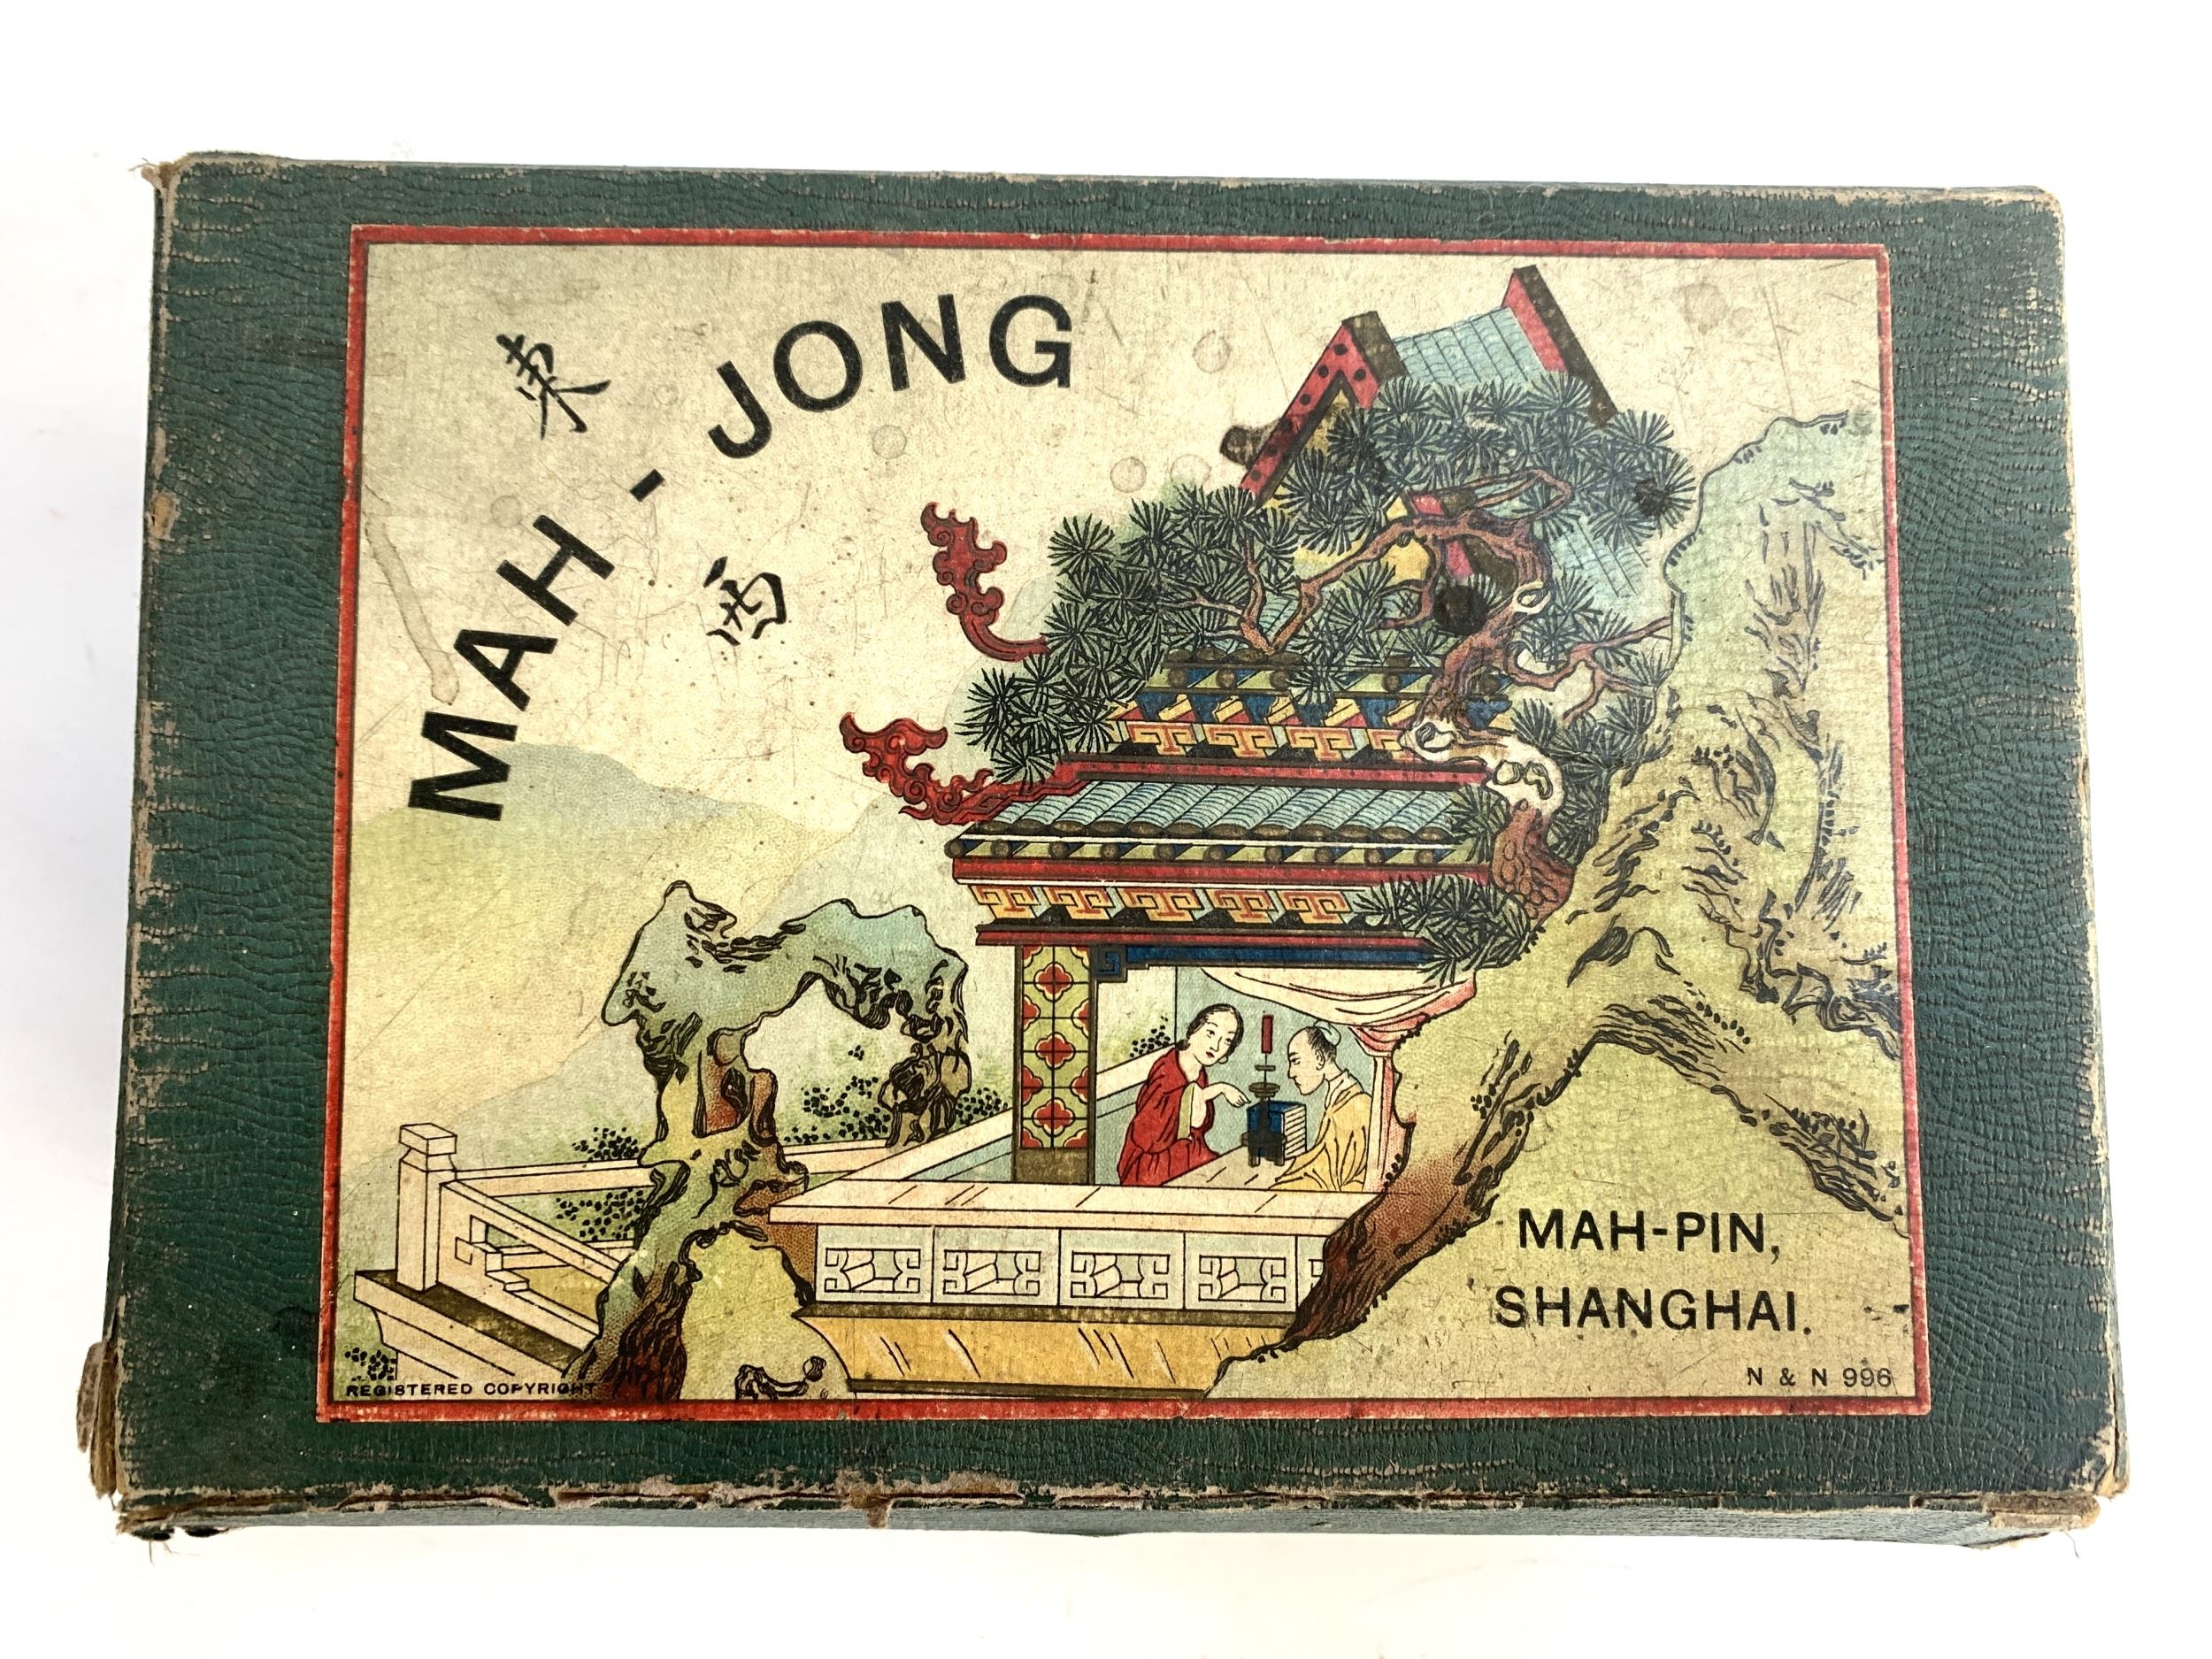 A mahjong set, Shanghai consisting of tiles, dice, scoring sticks together with a Max Robertson rule - Bild 2 aus 3